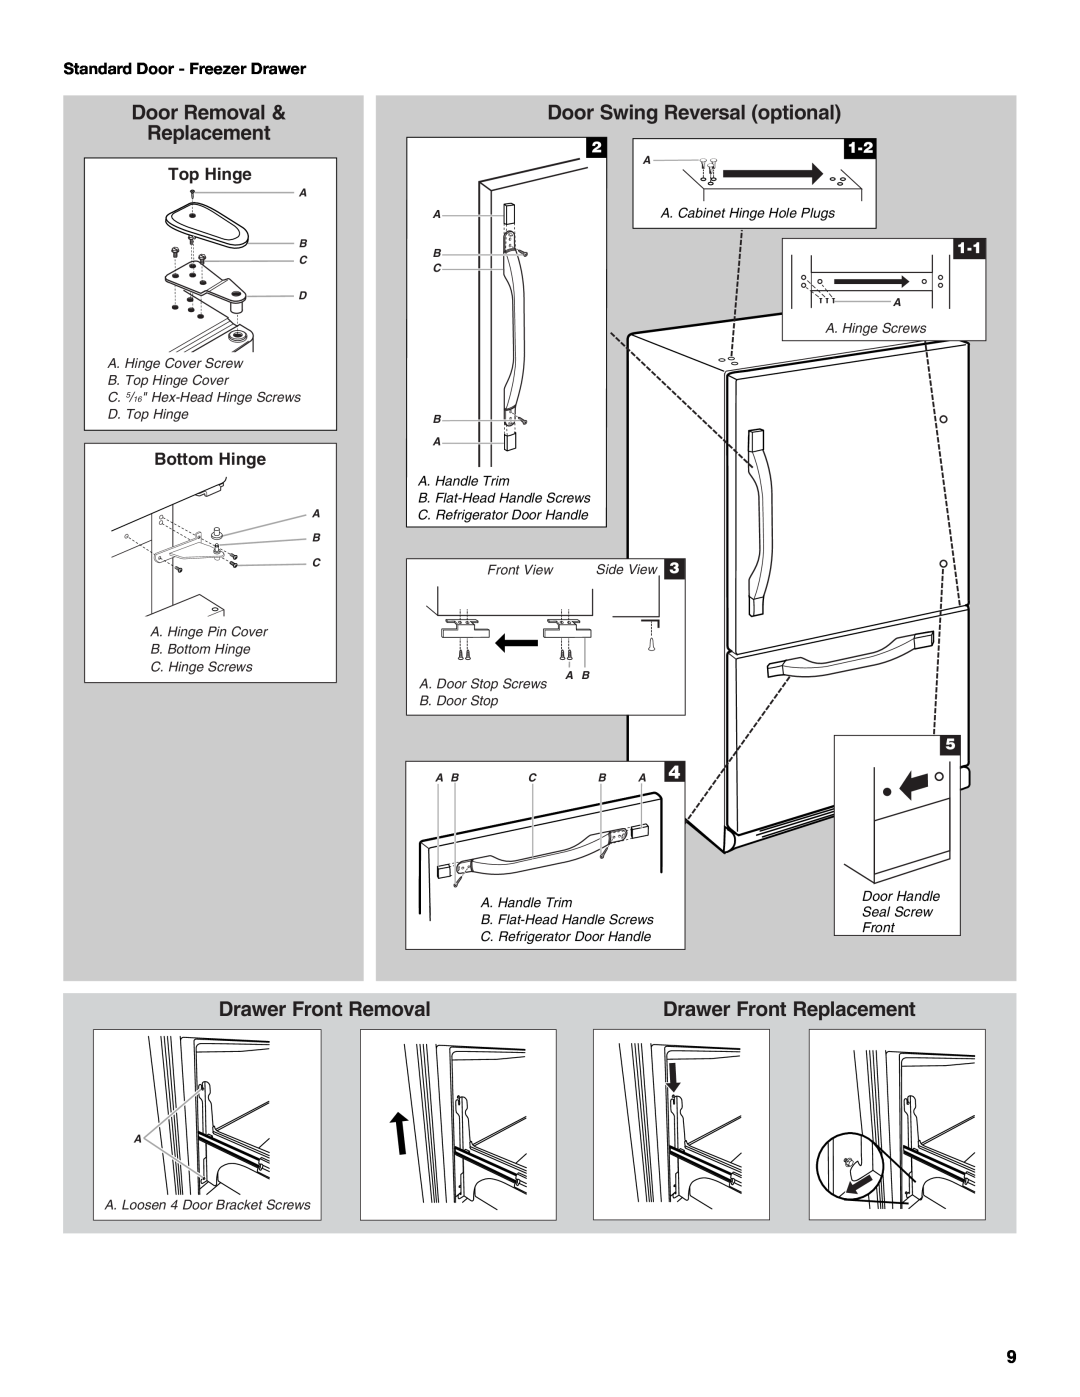 Whirlpool W10208431A Drawer Front Removal, Drawer Front Replacement, Door Removal Replacement, Top Hinge, Bottom Hinge 